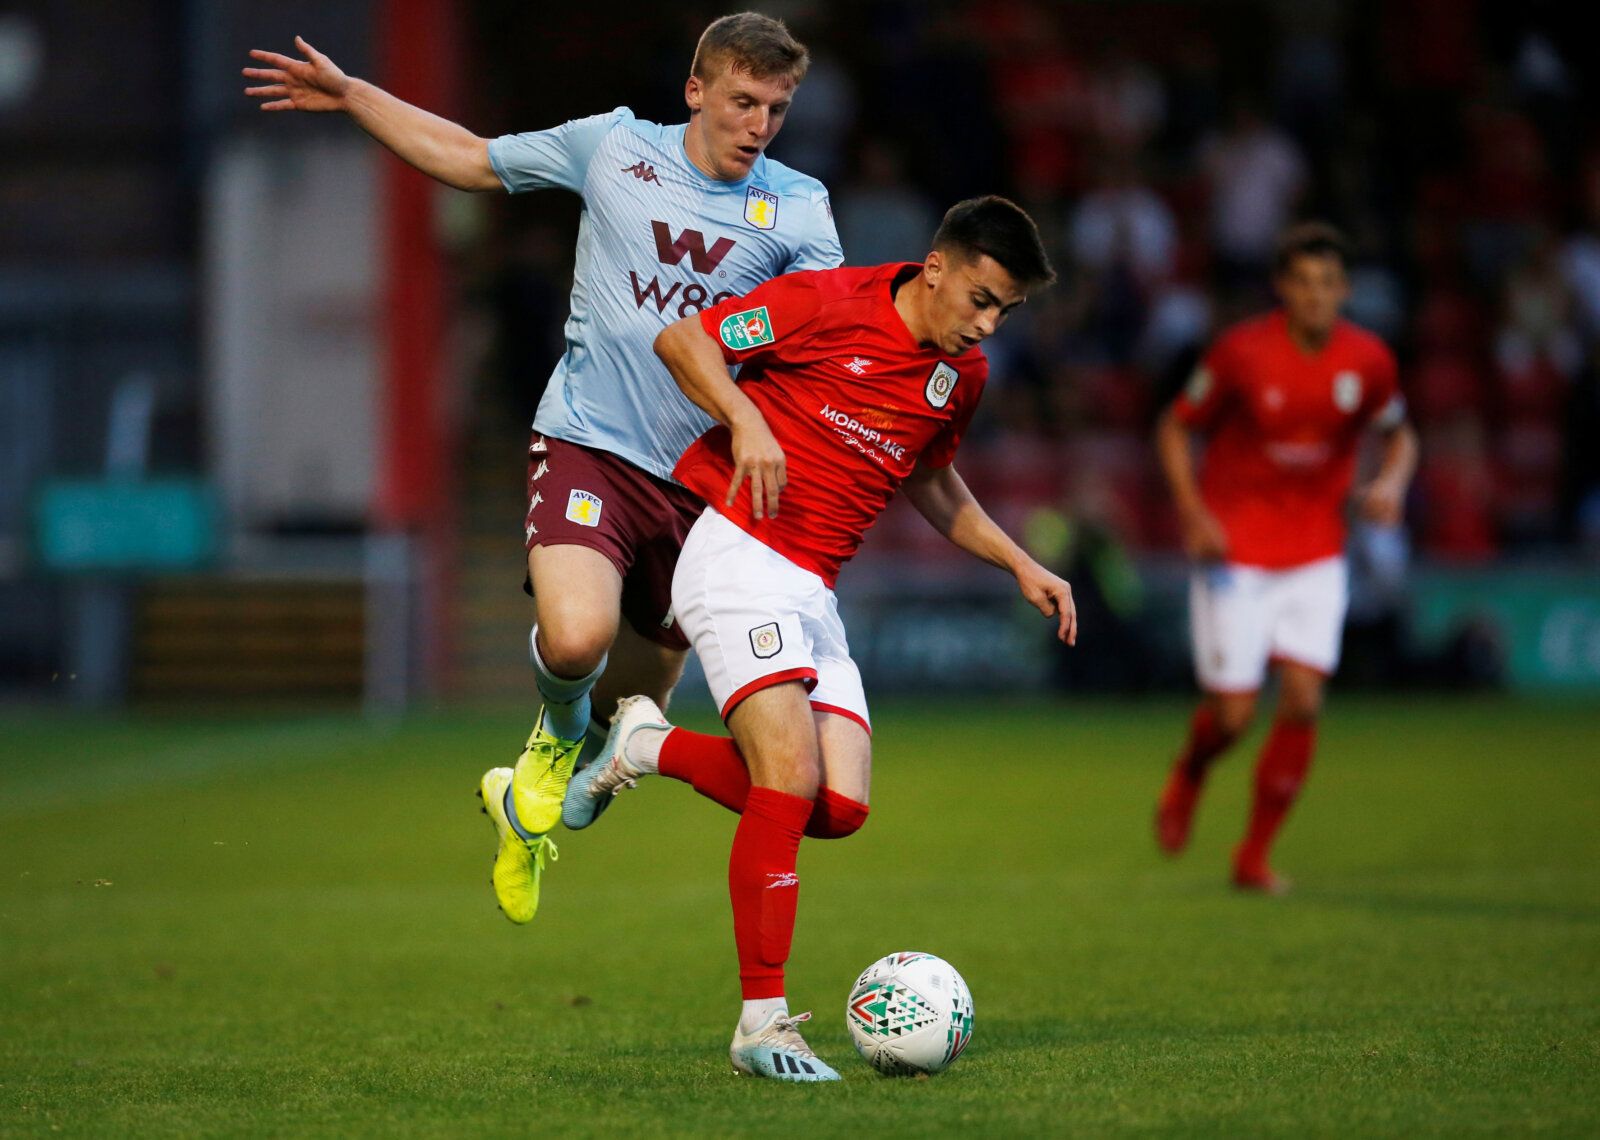 Soccer Football - Carabao Cup Second Round - Crewe Alexandra v Aston Villa - The Alexandra Stadium, Crewe, Britain - August 27, 2019  Aston Villa's Matt Targett in action with Crewe Alexandra's Owen Dale     Action Images via Reuters/Ed Sykes  EDITORIAL USE ONLY. No use with unauthorized audio, video, data, fixture lists, club/league logos or "live" services. Online in-match use limited to 75 images, no video emulation. No use in betting, games or single club/league/player publications.  Please 